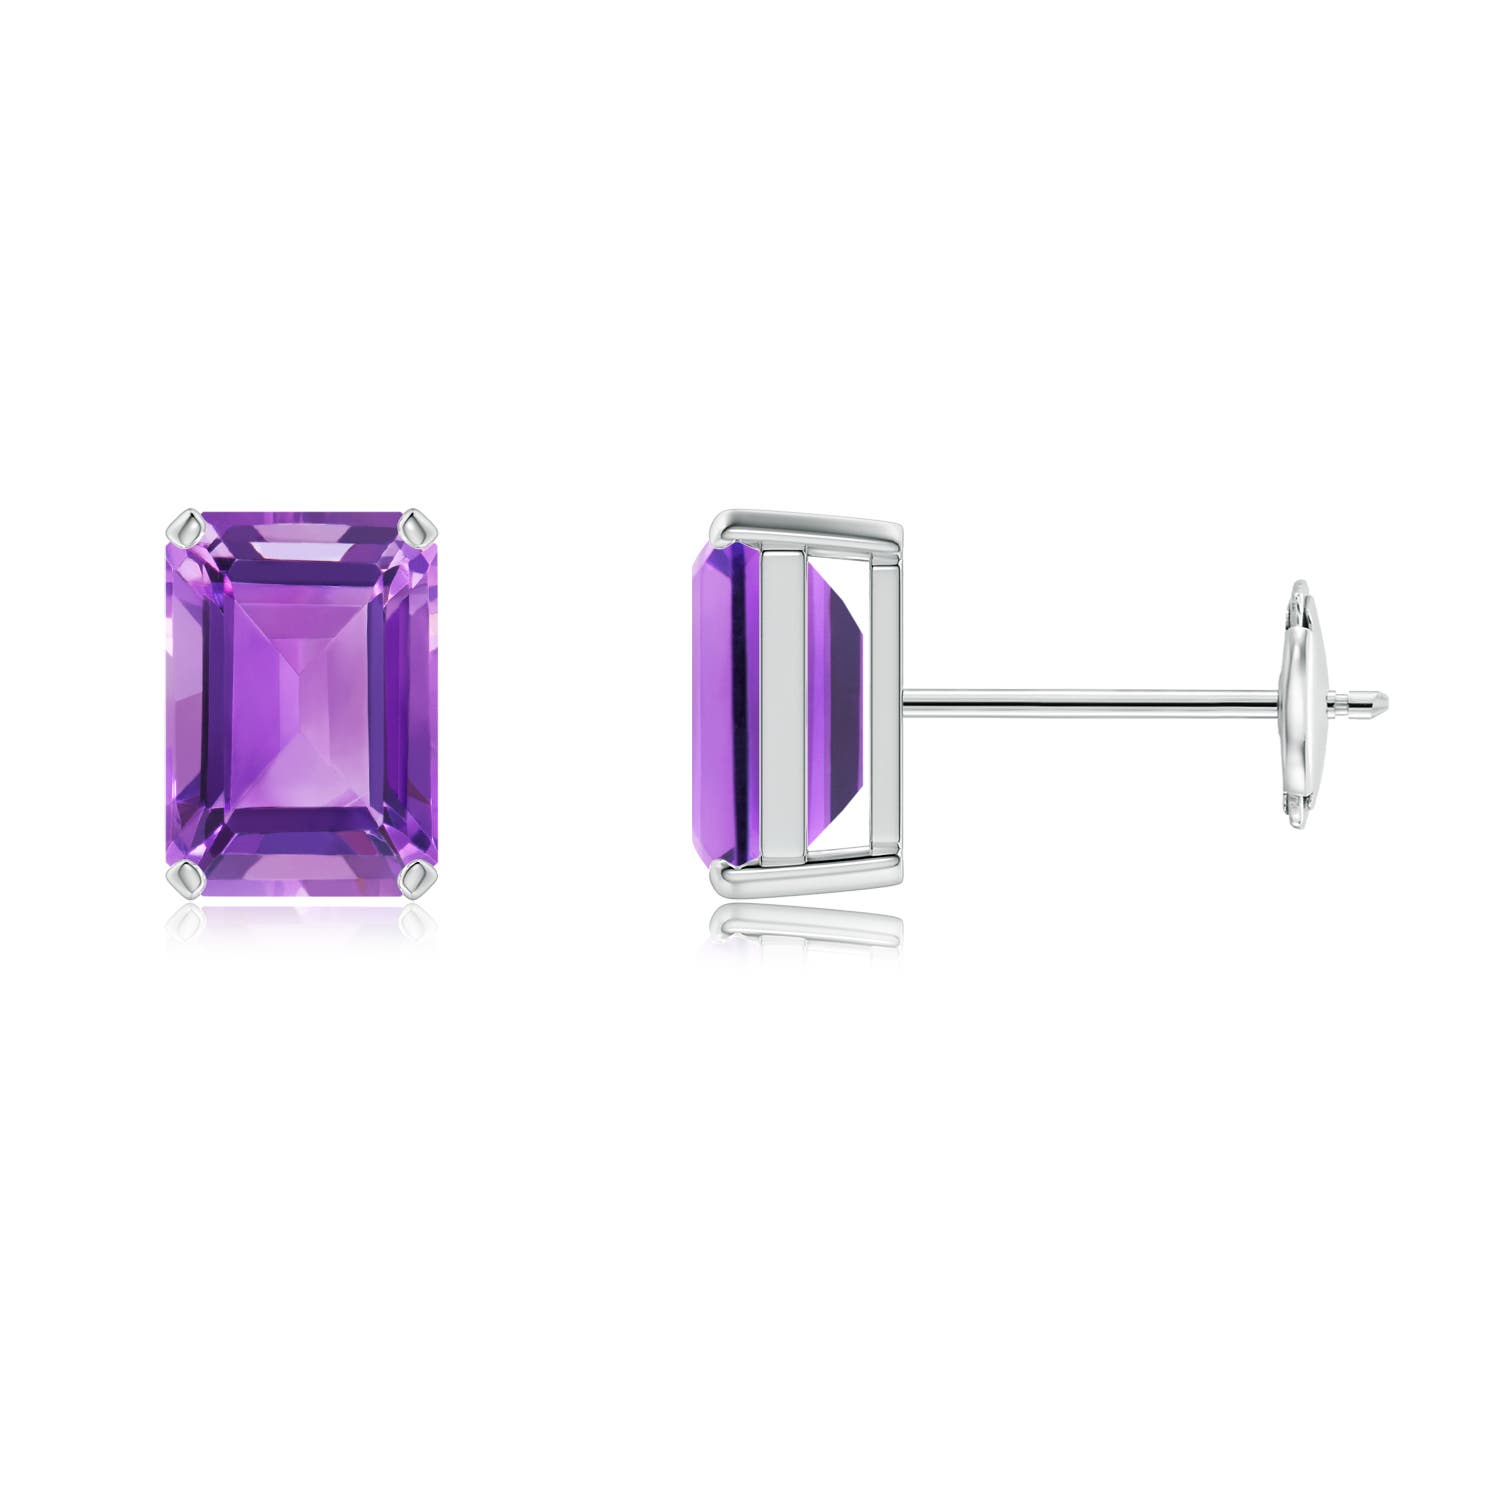 AA - Amethyst / 1.8 CT / 14 KT White Gold